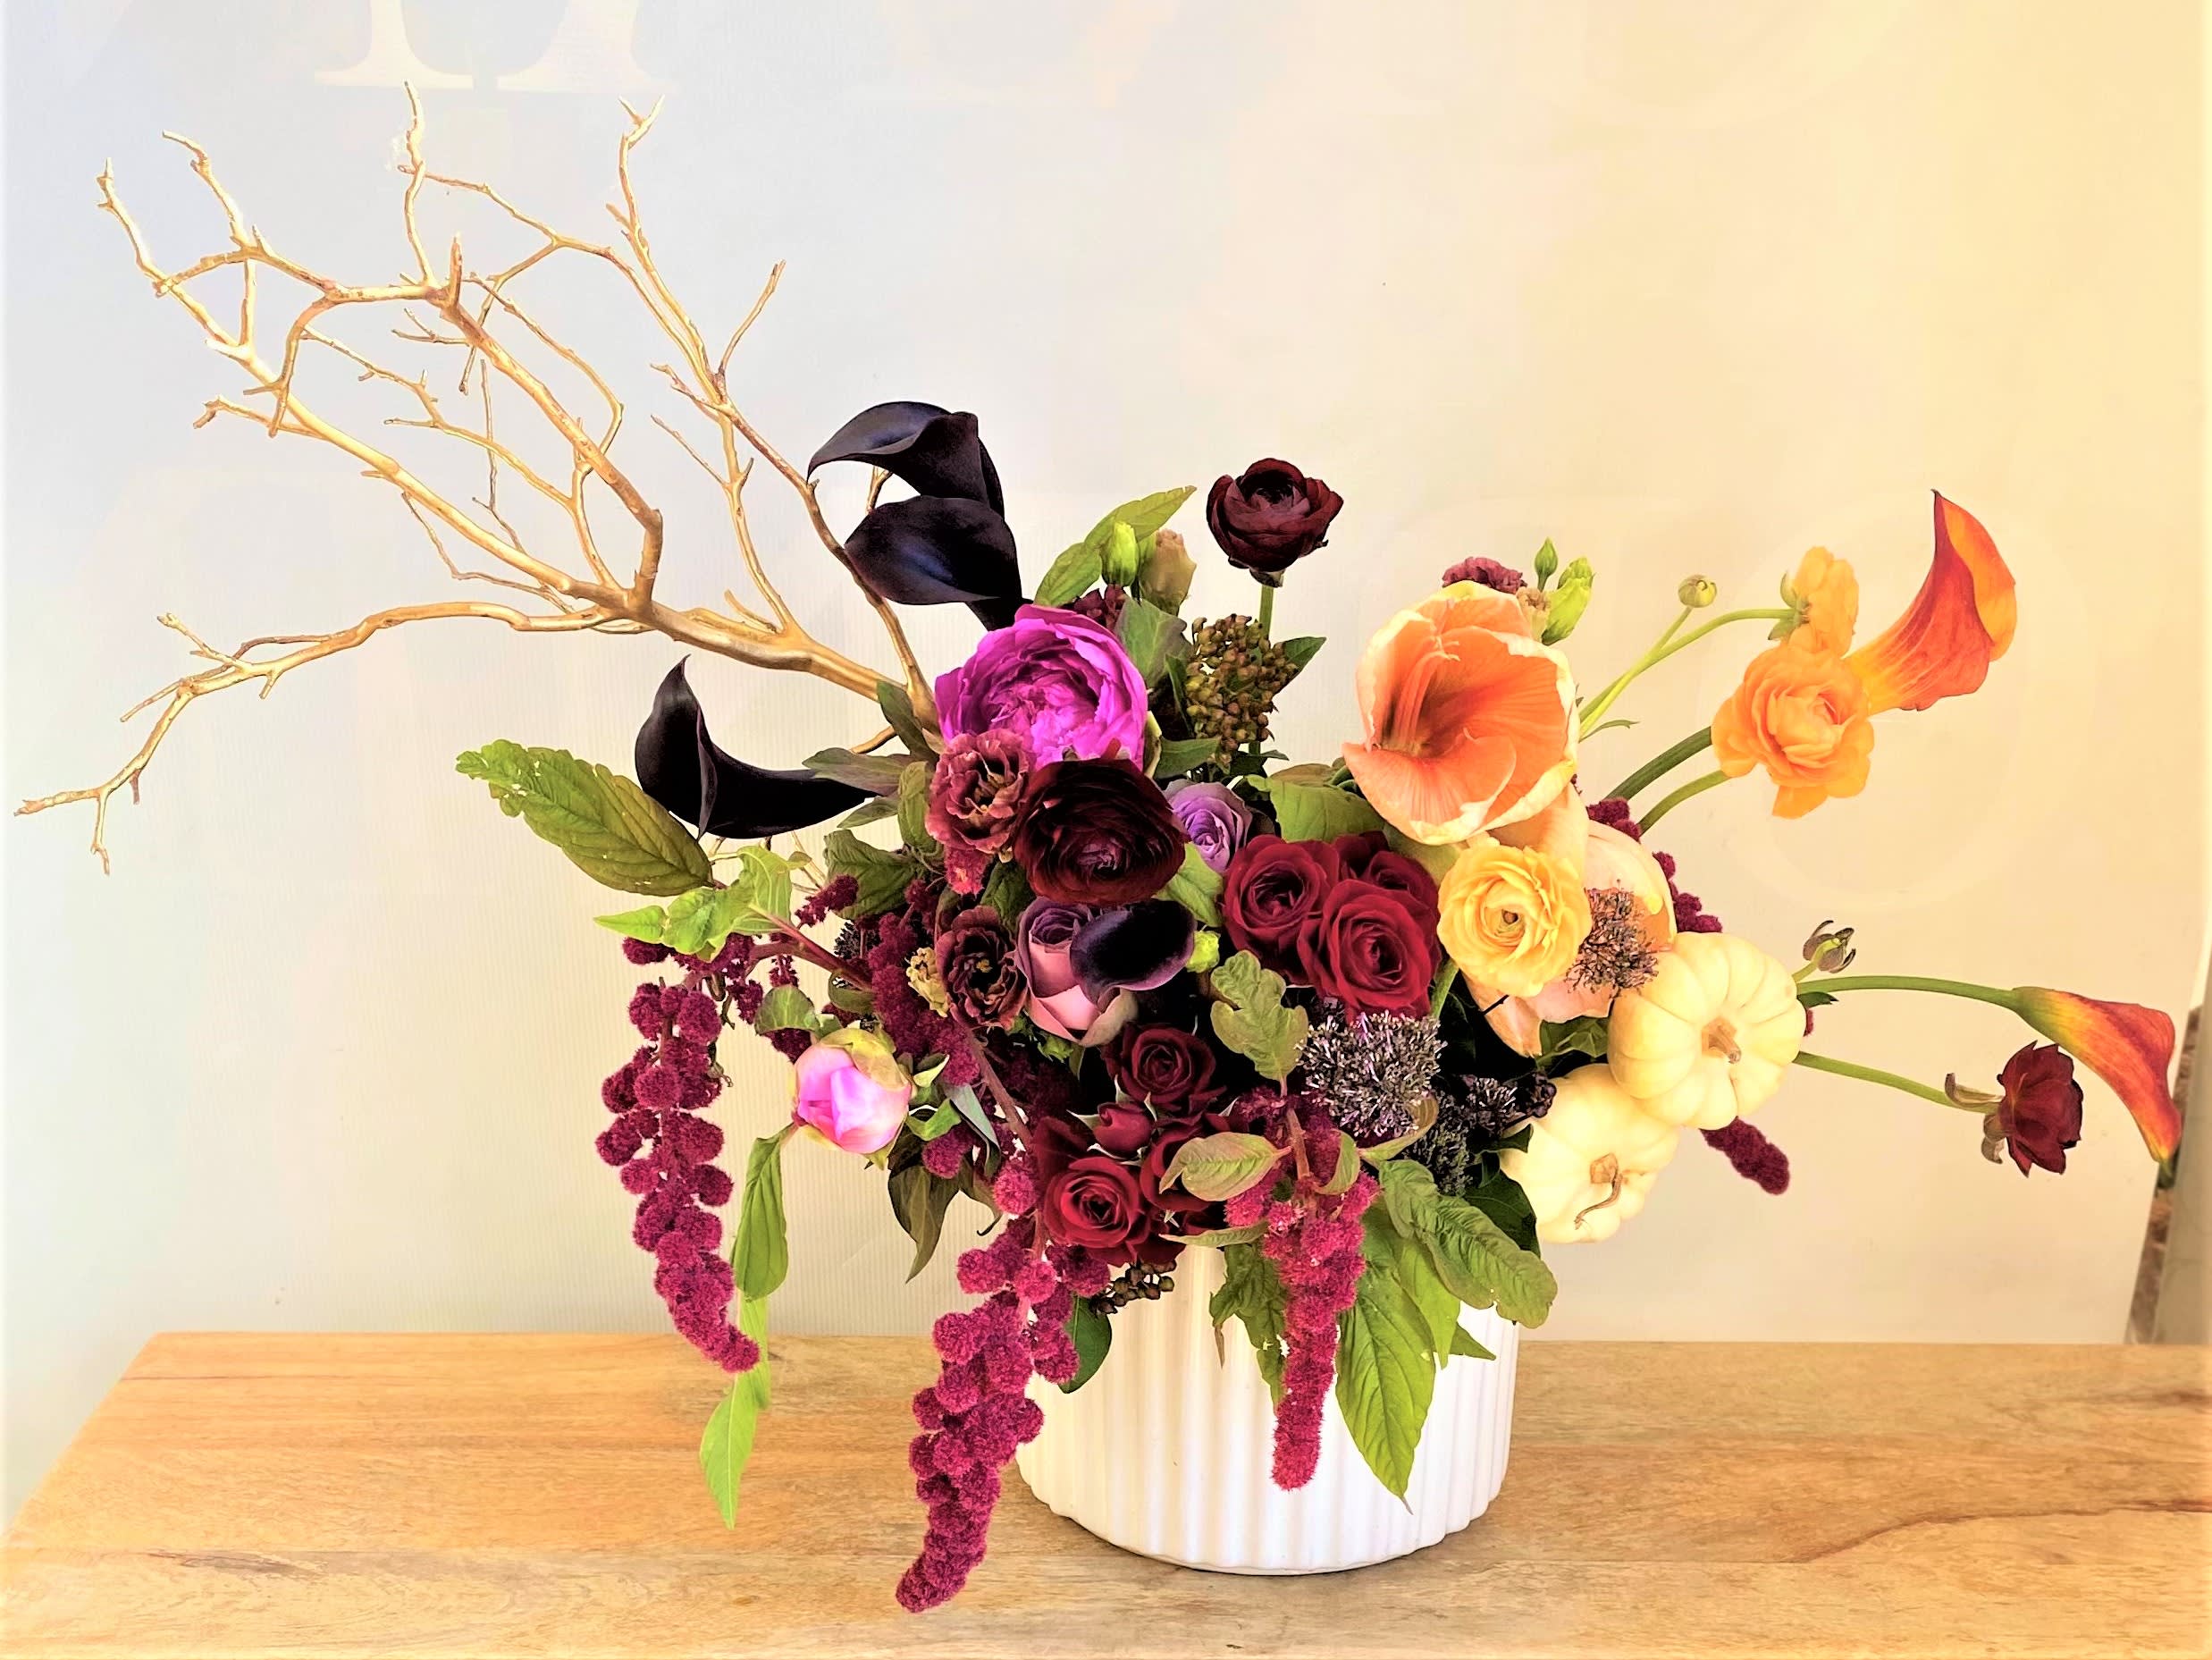 Autumn Party - One of our most popular autumn arrangements! A mix of seasonal autumn flowers in bright tones of burgundy, red, gold, and pink come together to create this beautiful arrangement. Flowers include peony, ranunculus, roses, calla lilies, and mixed greenery.   Centerpiece  make a wonderful treat for yourself or a loved one to brighten up any space with autumn cheer.